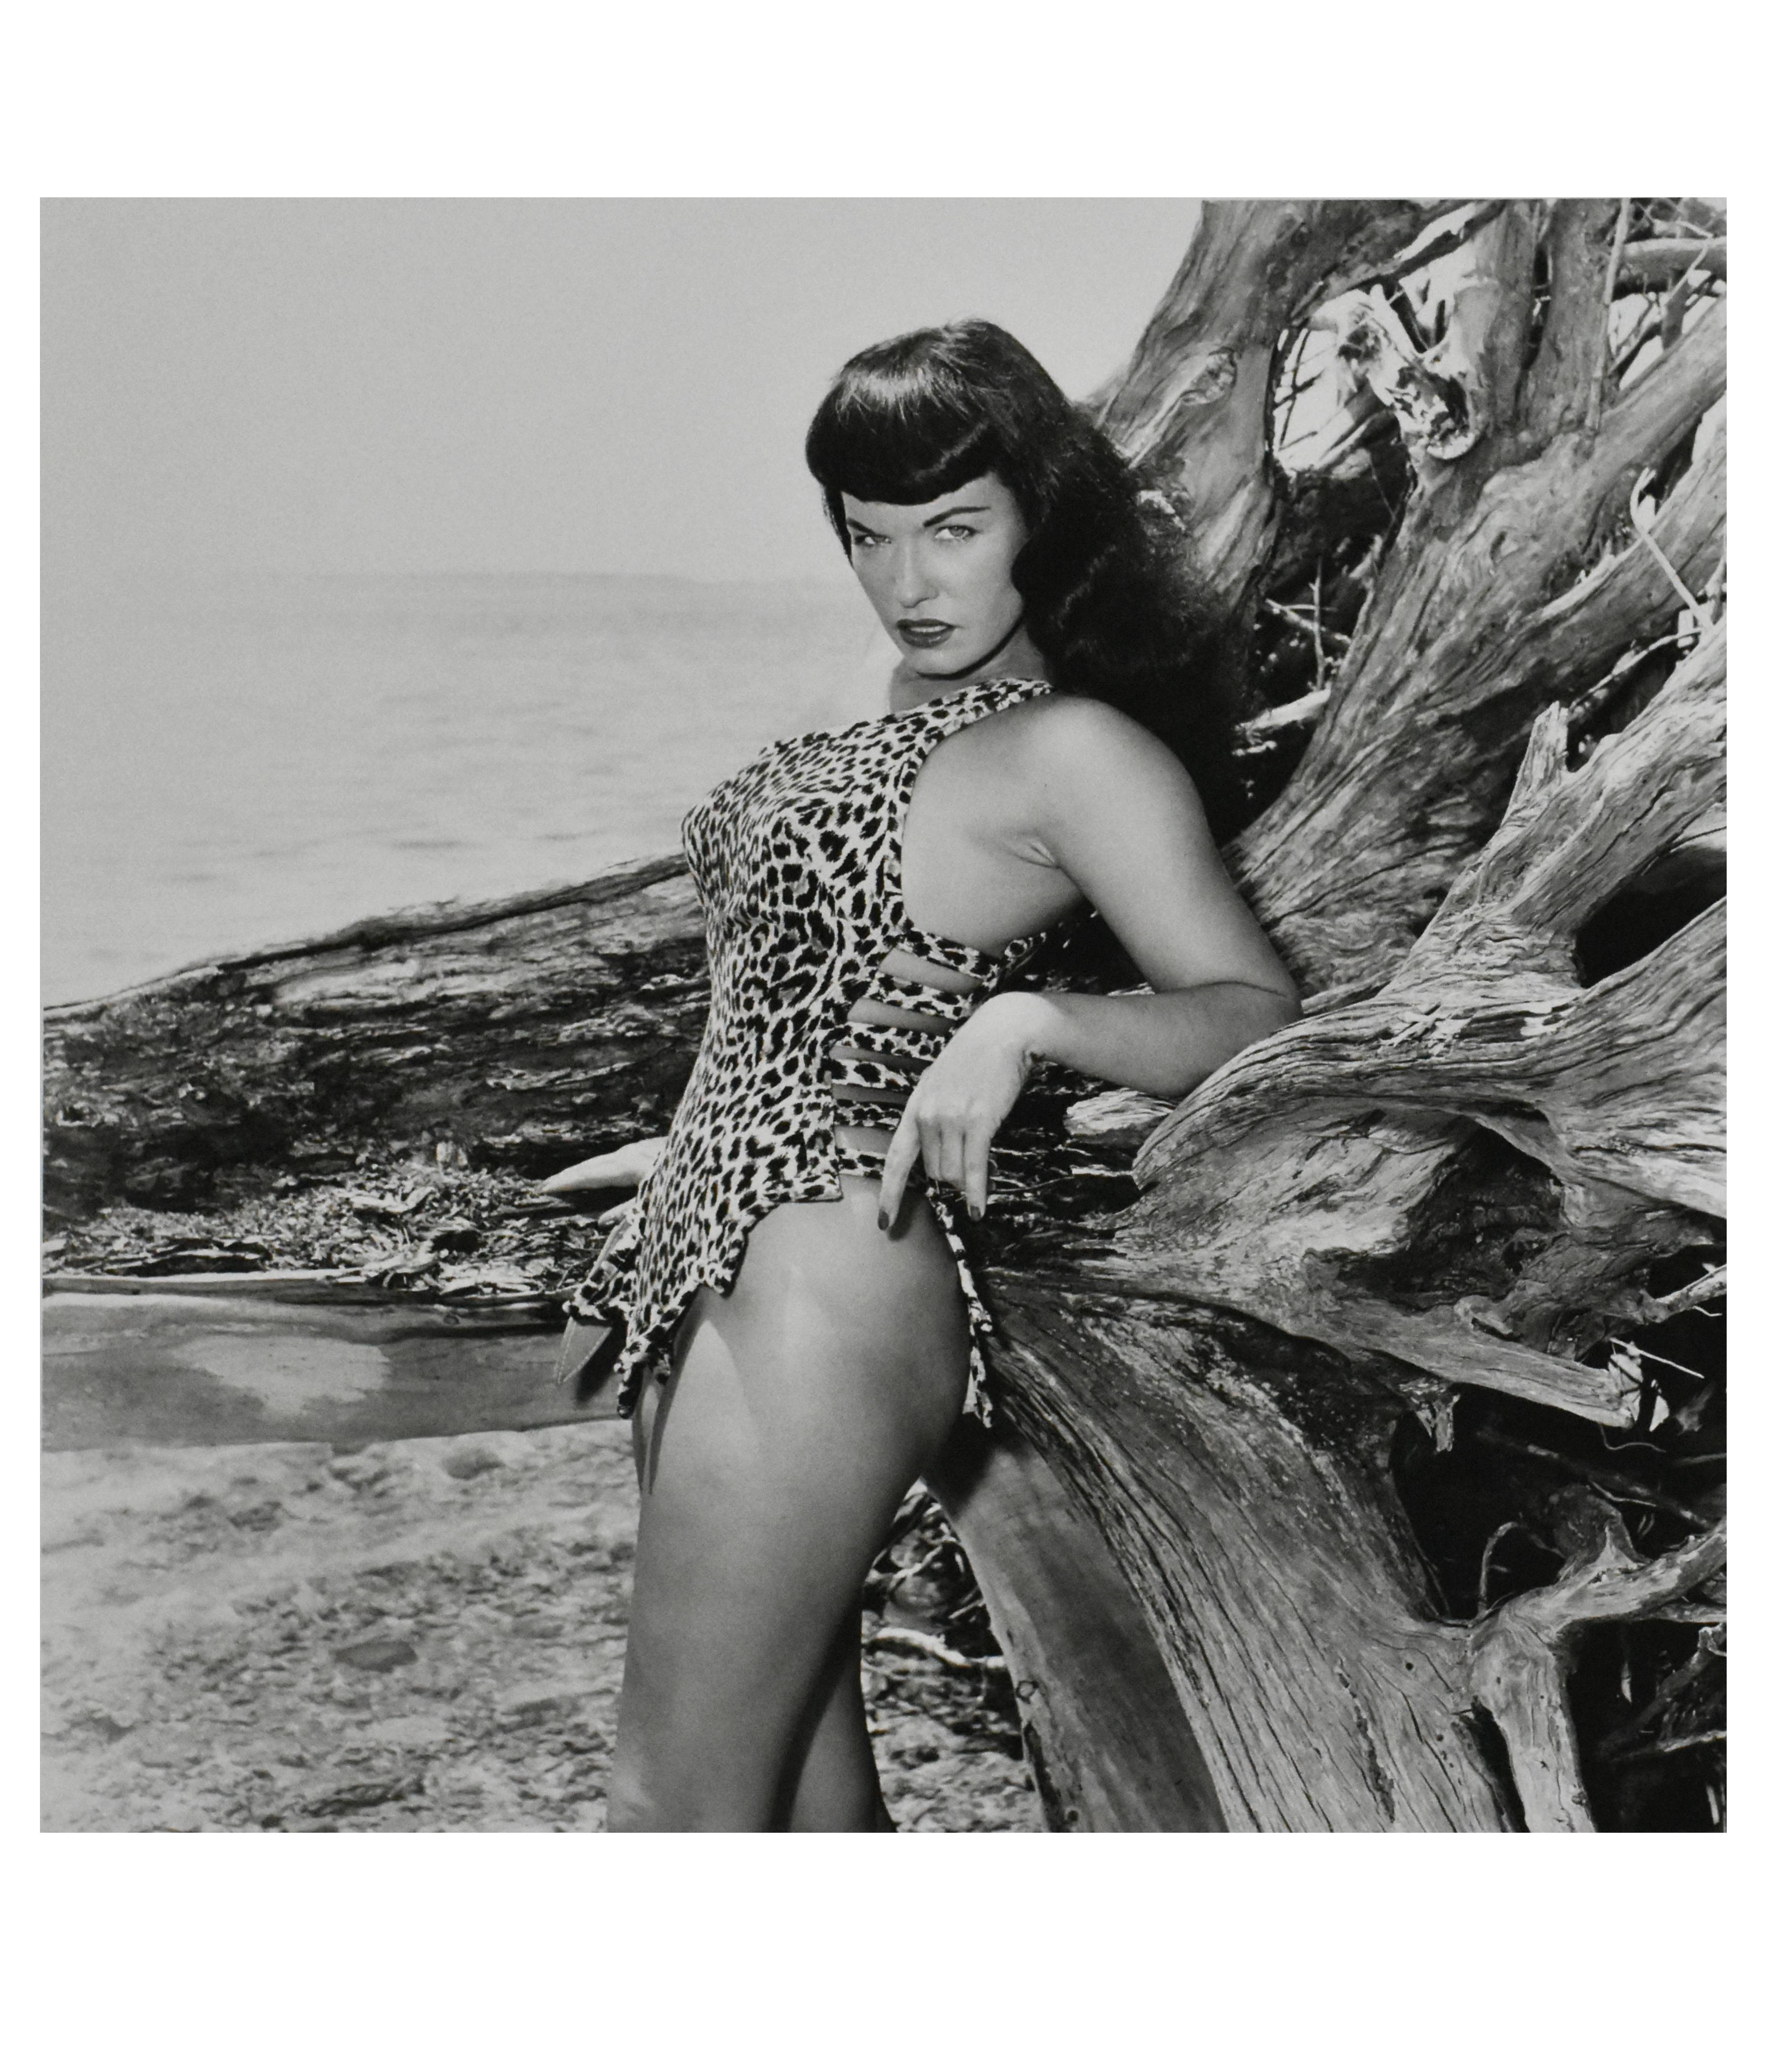 "Bettie Page with Driftwood, Key Biscayne, FL", 1954